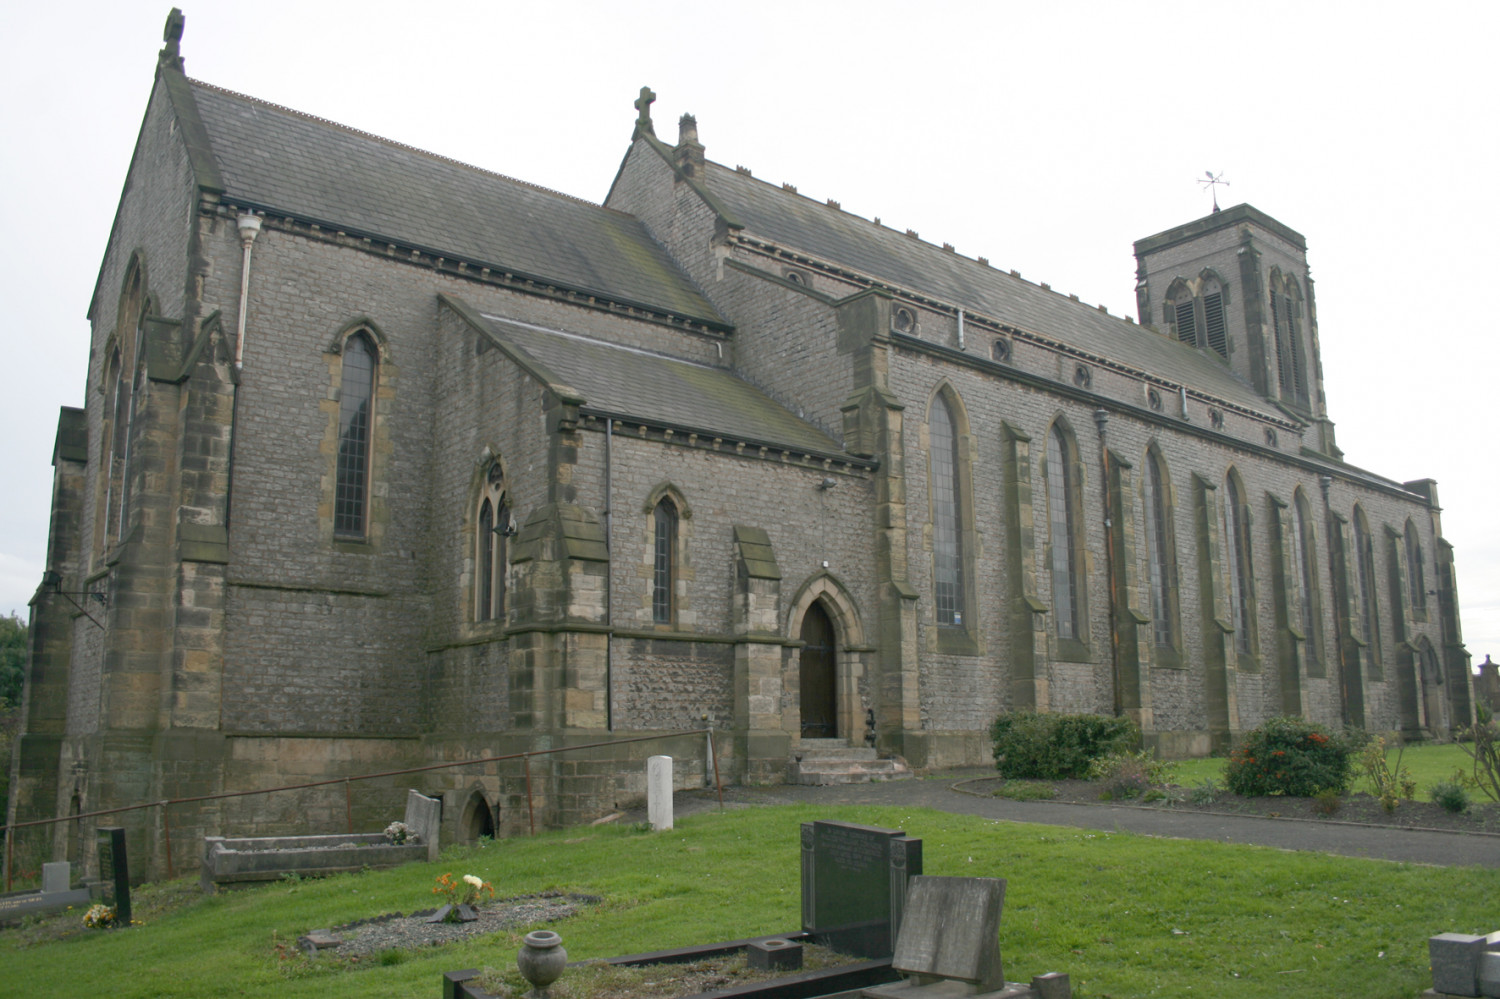 St James' Church in Dudley